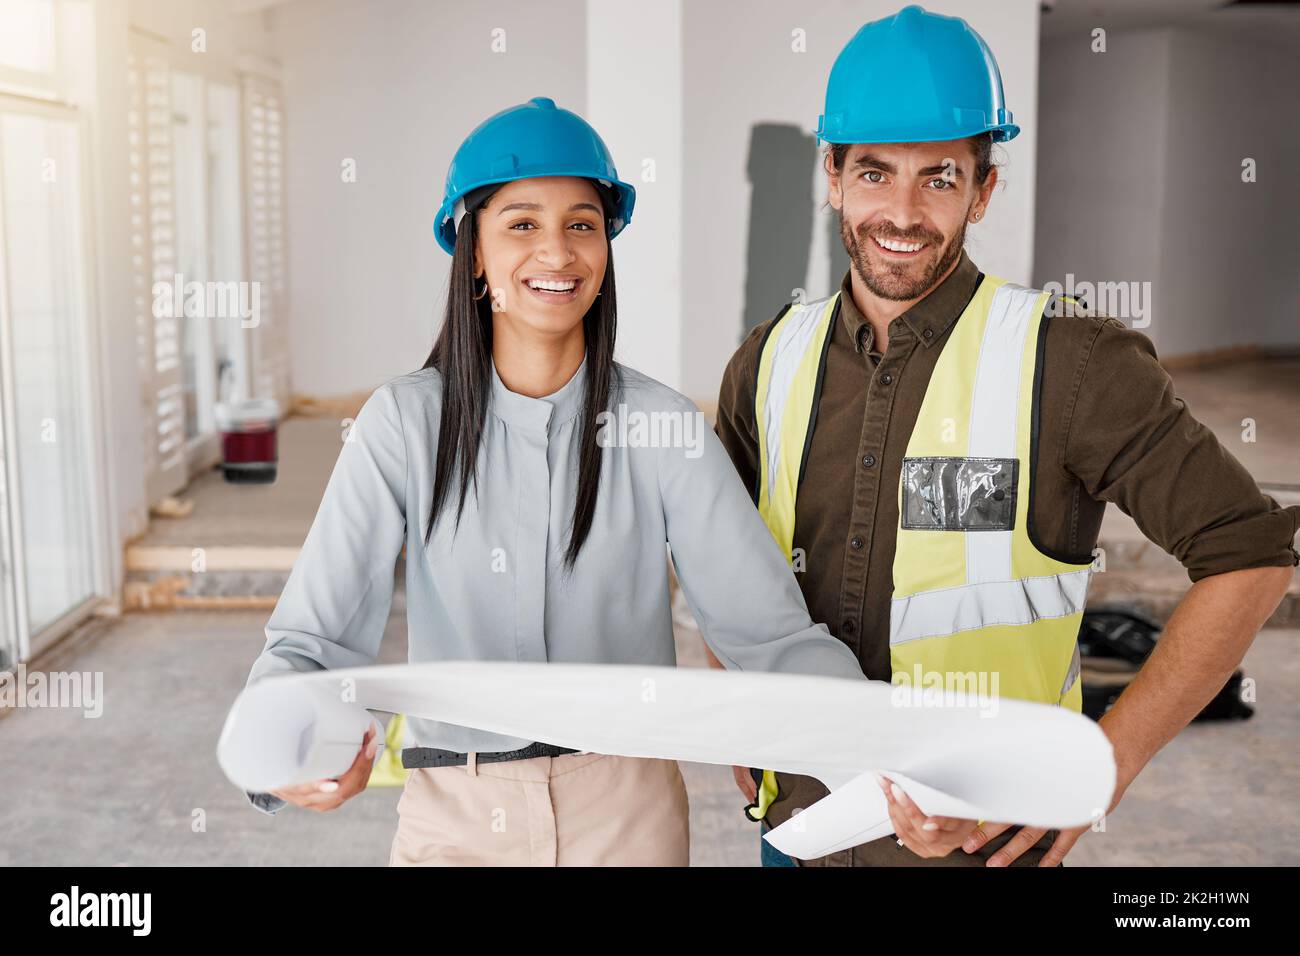 Building the house weve always dreamt of. Shot of two young architects looking at building plans on site. Stock Photo